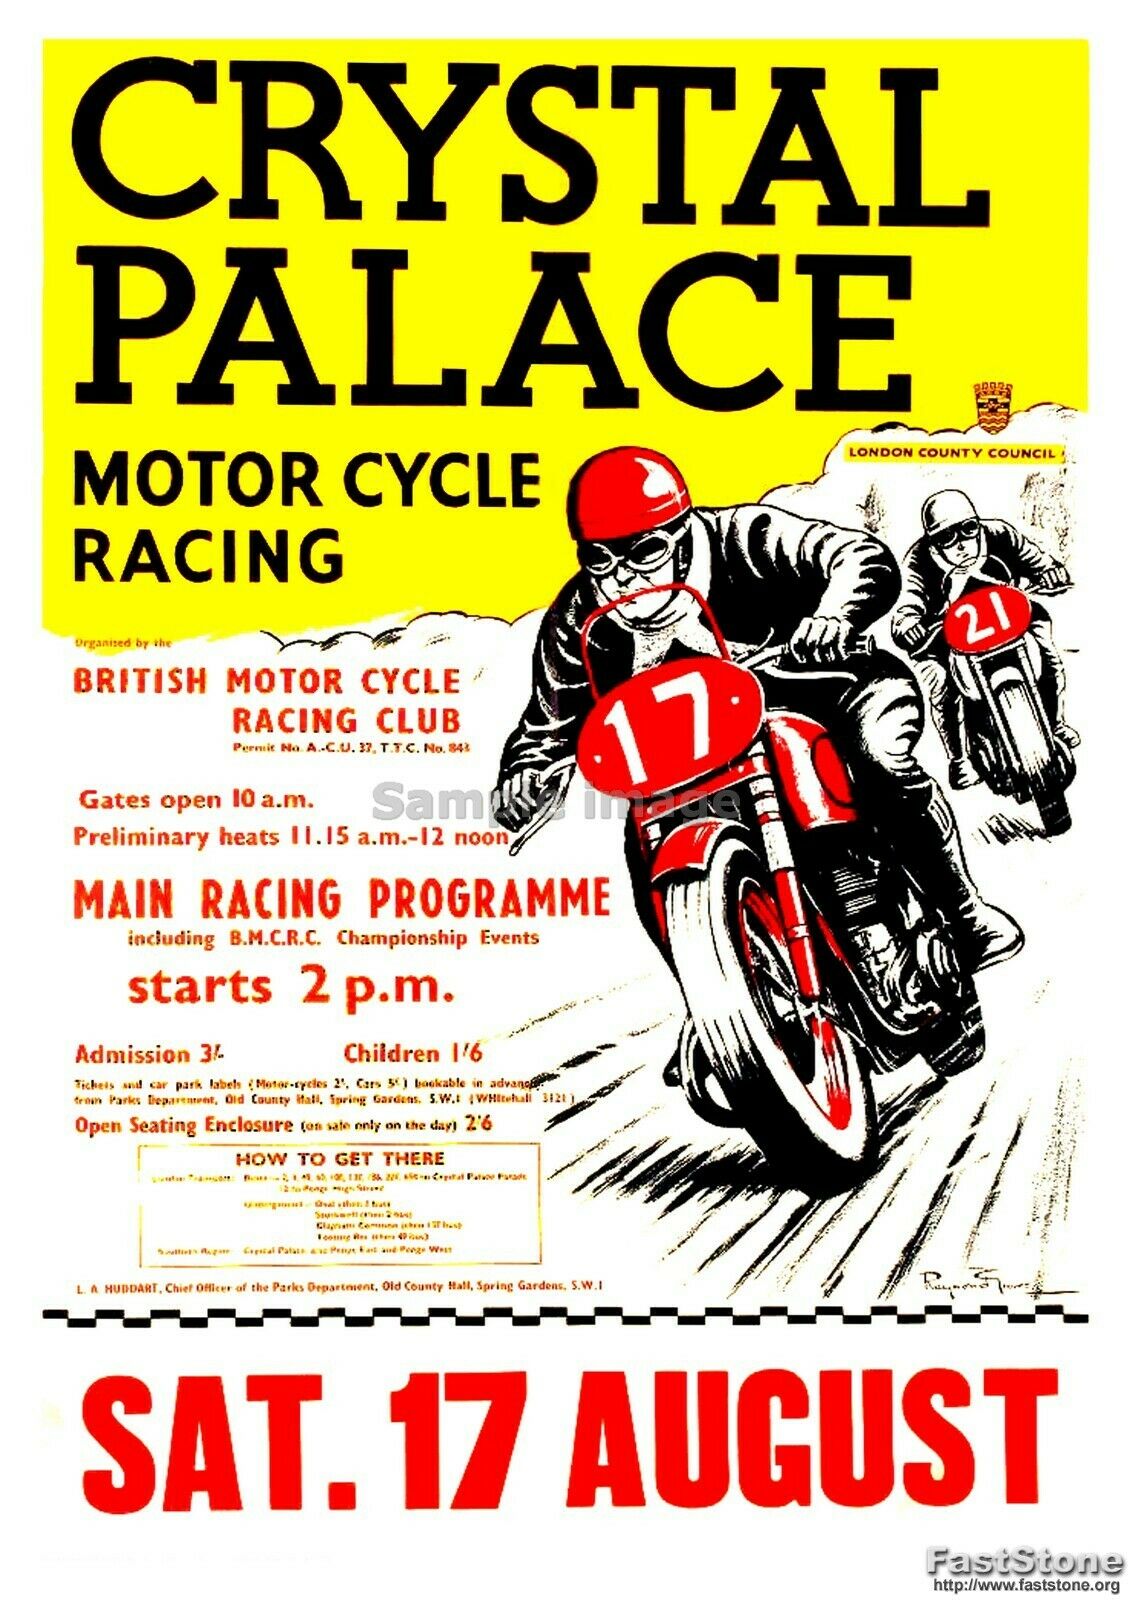 Crystal Palace Racing Promotional Motorcycle Poster - Size A3/A4